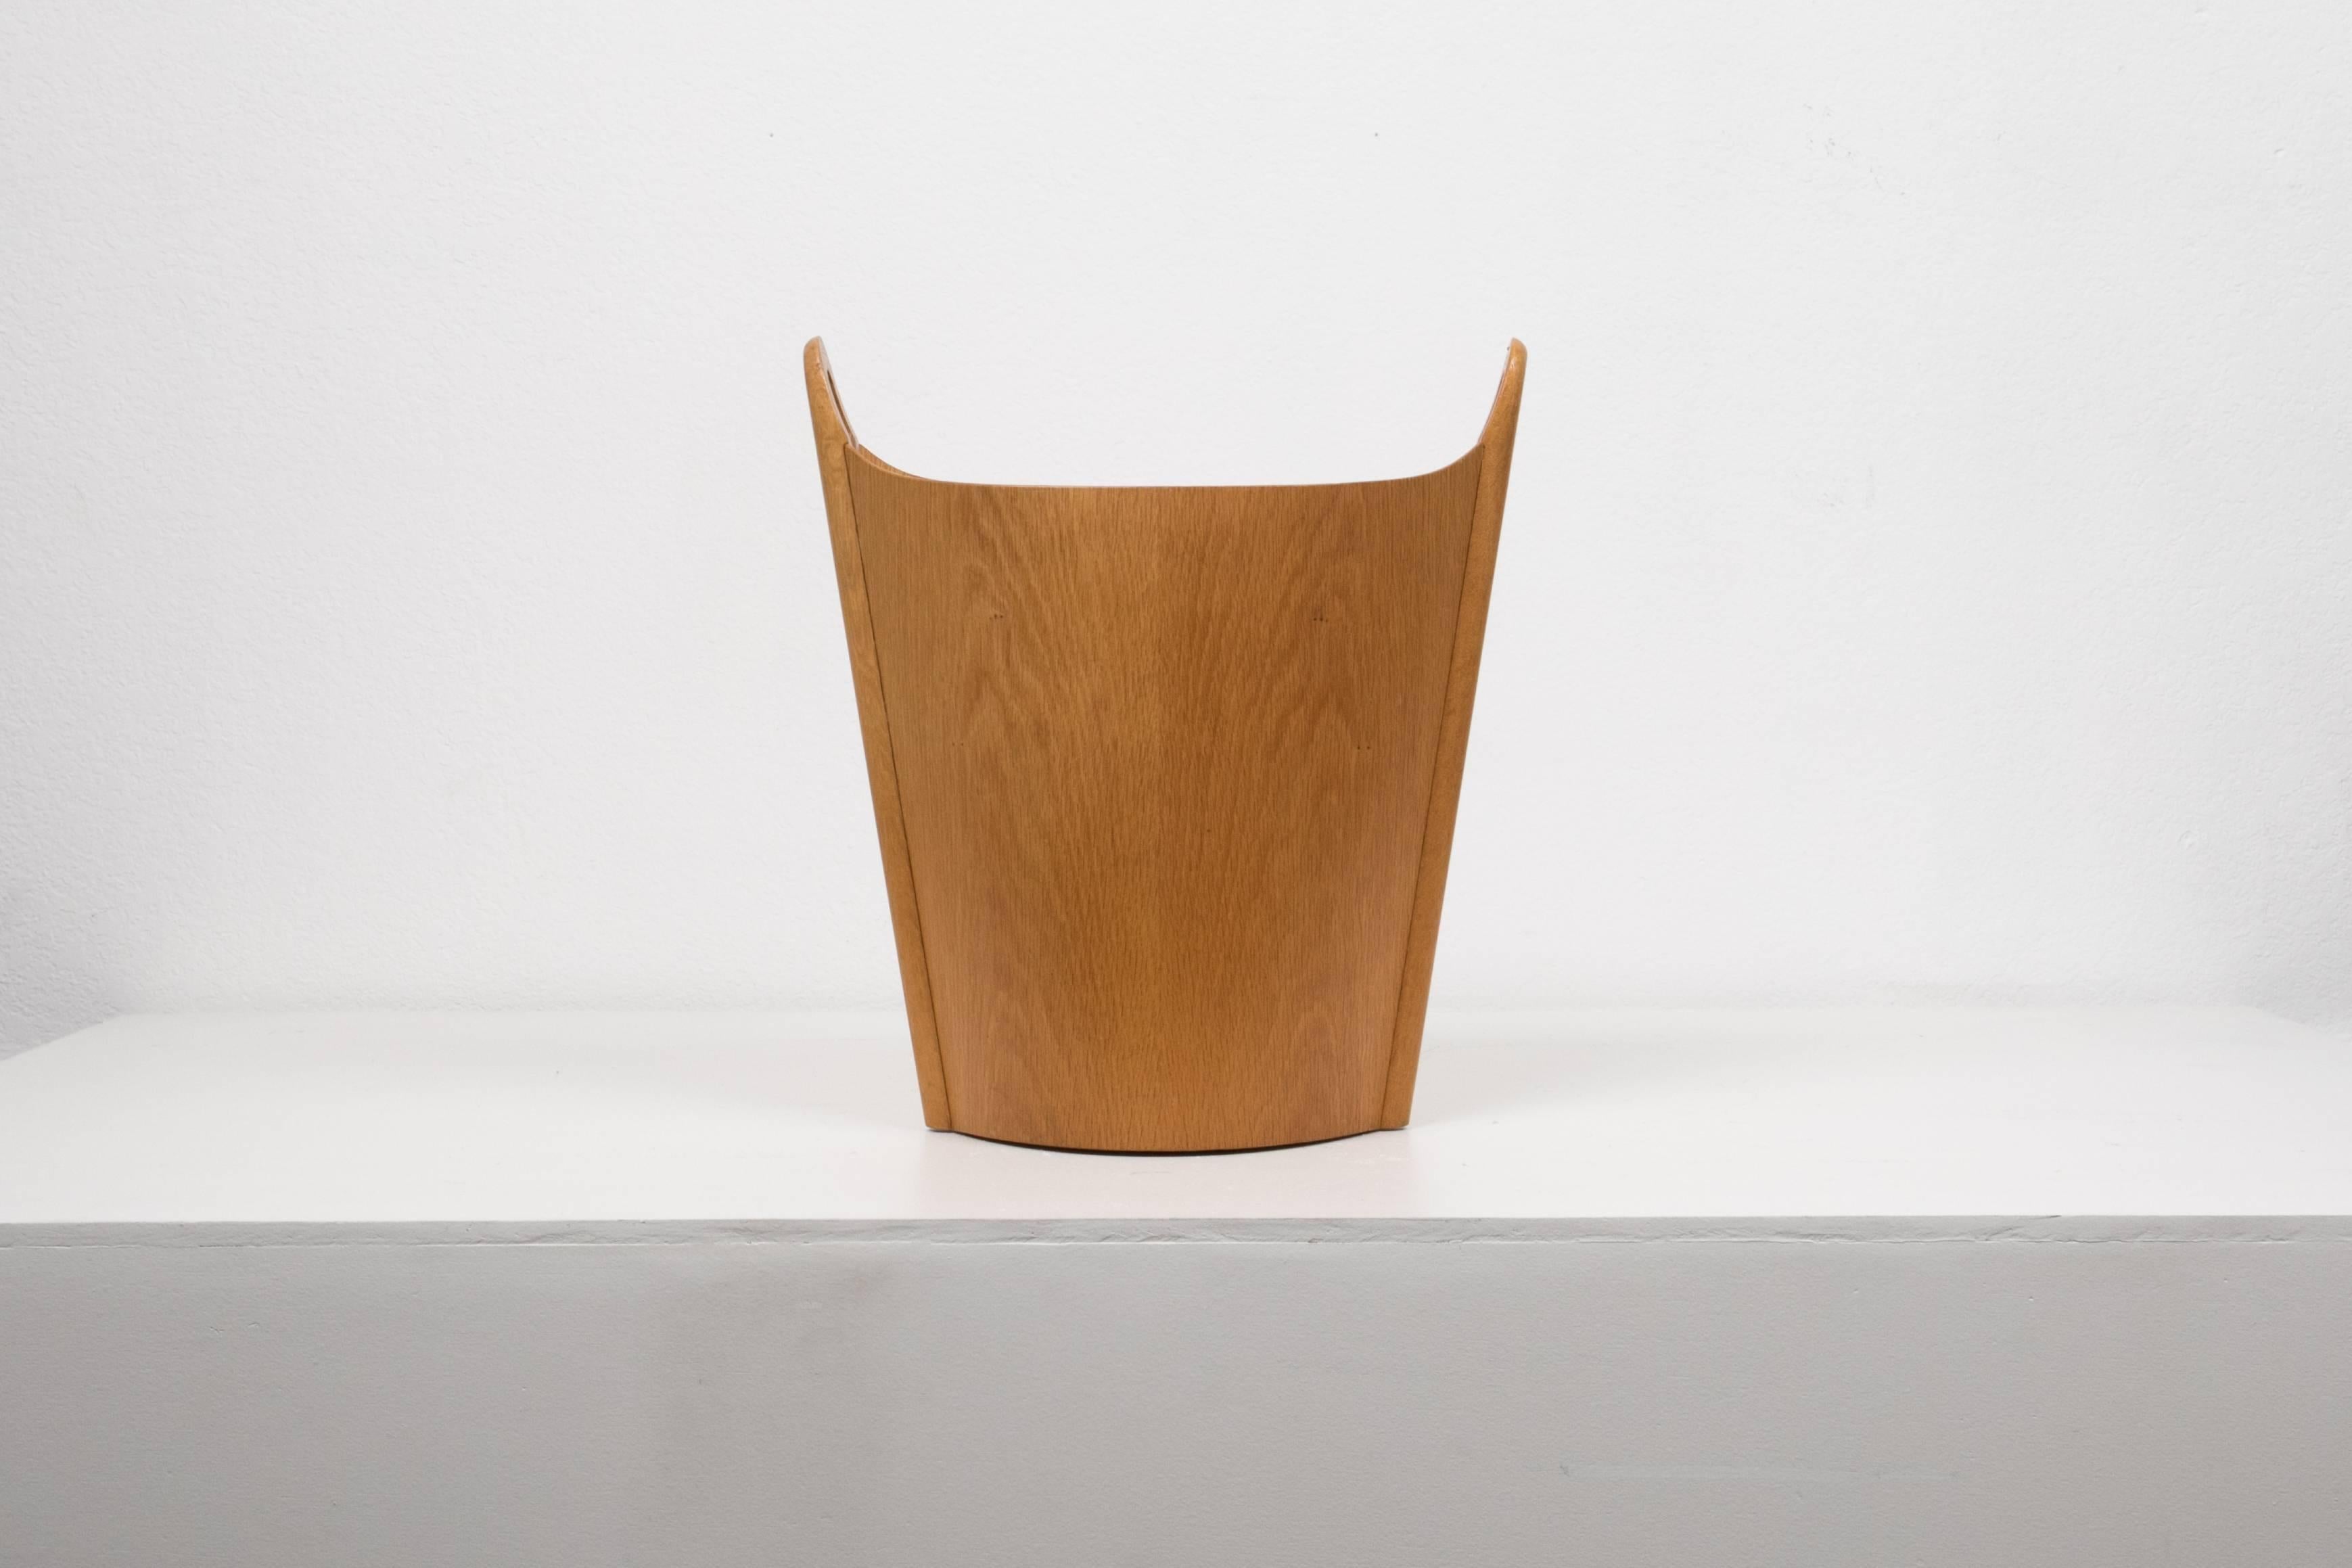 A wastebasket with delicate construction in elegantly patinated oak, designed and produced in Norway by Einar Barnes for P. S. Heggen. The oblong vessel has a ridge of solid oak at either end with a round, integrated handle.

Condition: Good